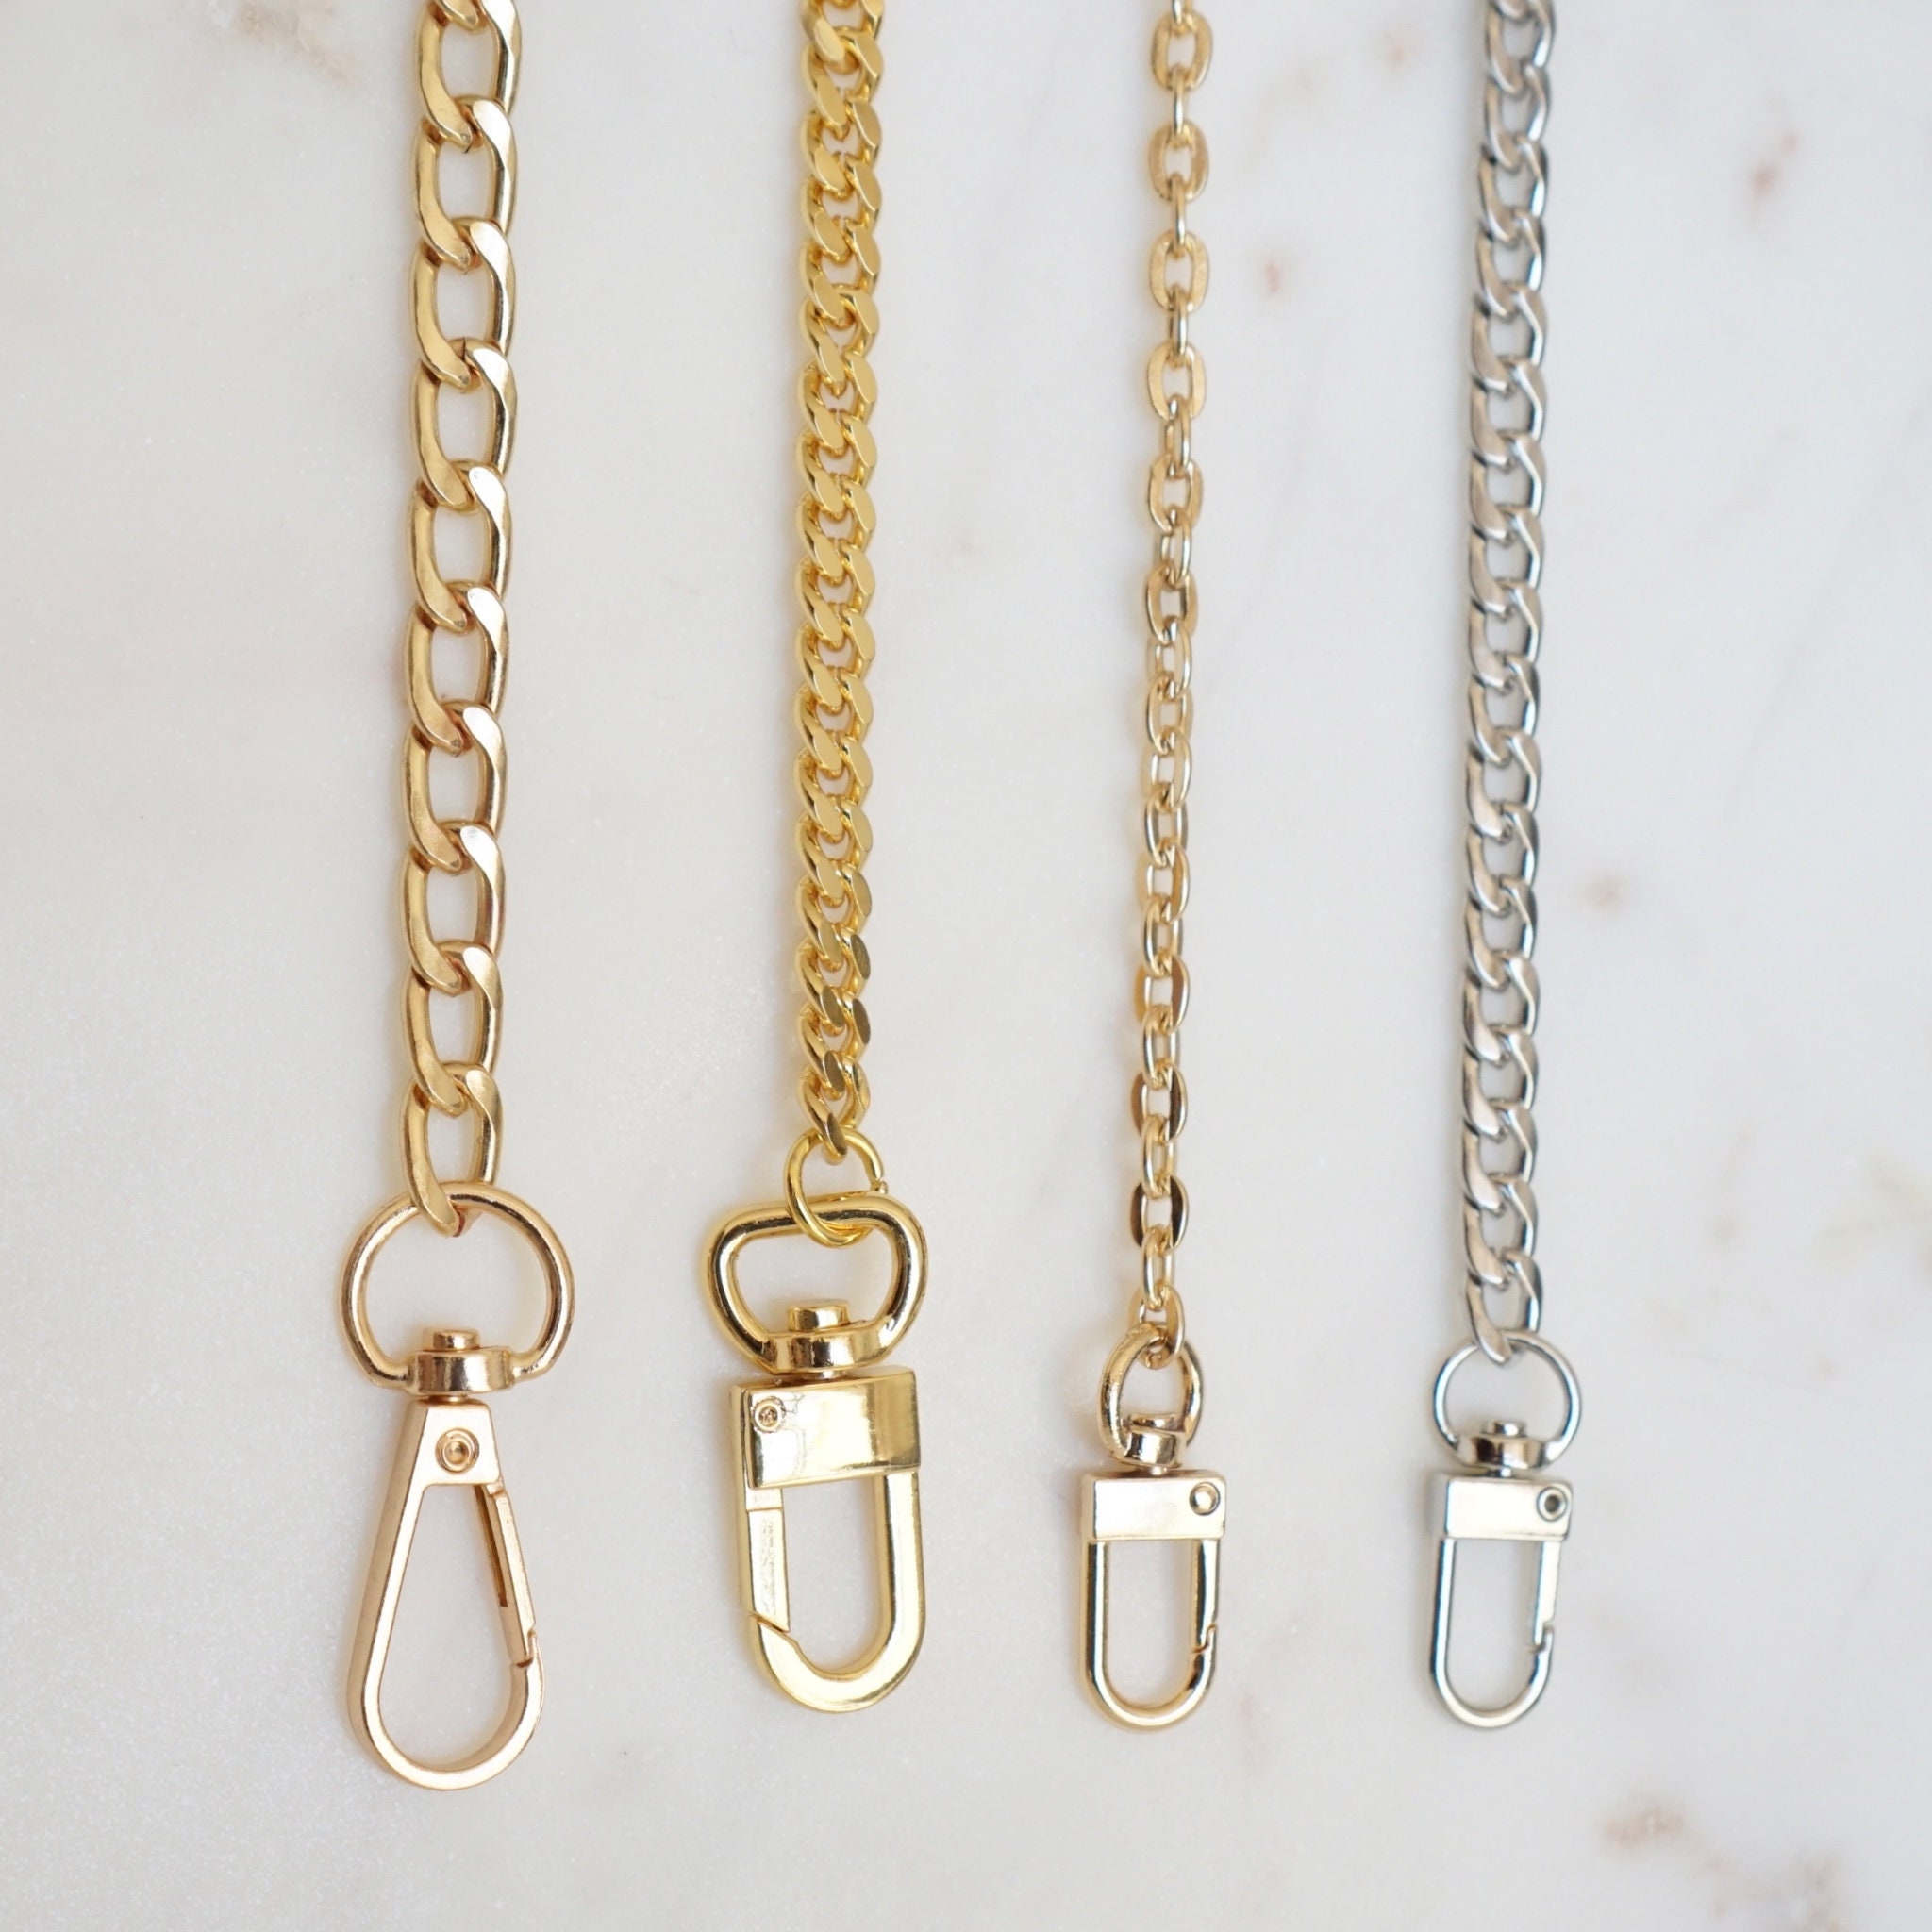 Minimalist Chain Bag Strap Gold Replaceable